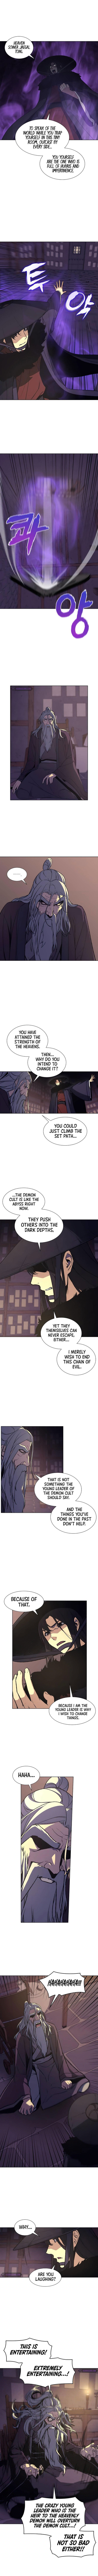 I Reincarnated As The Crazed Heir Chapter 8 page 8